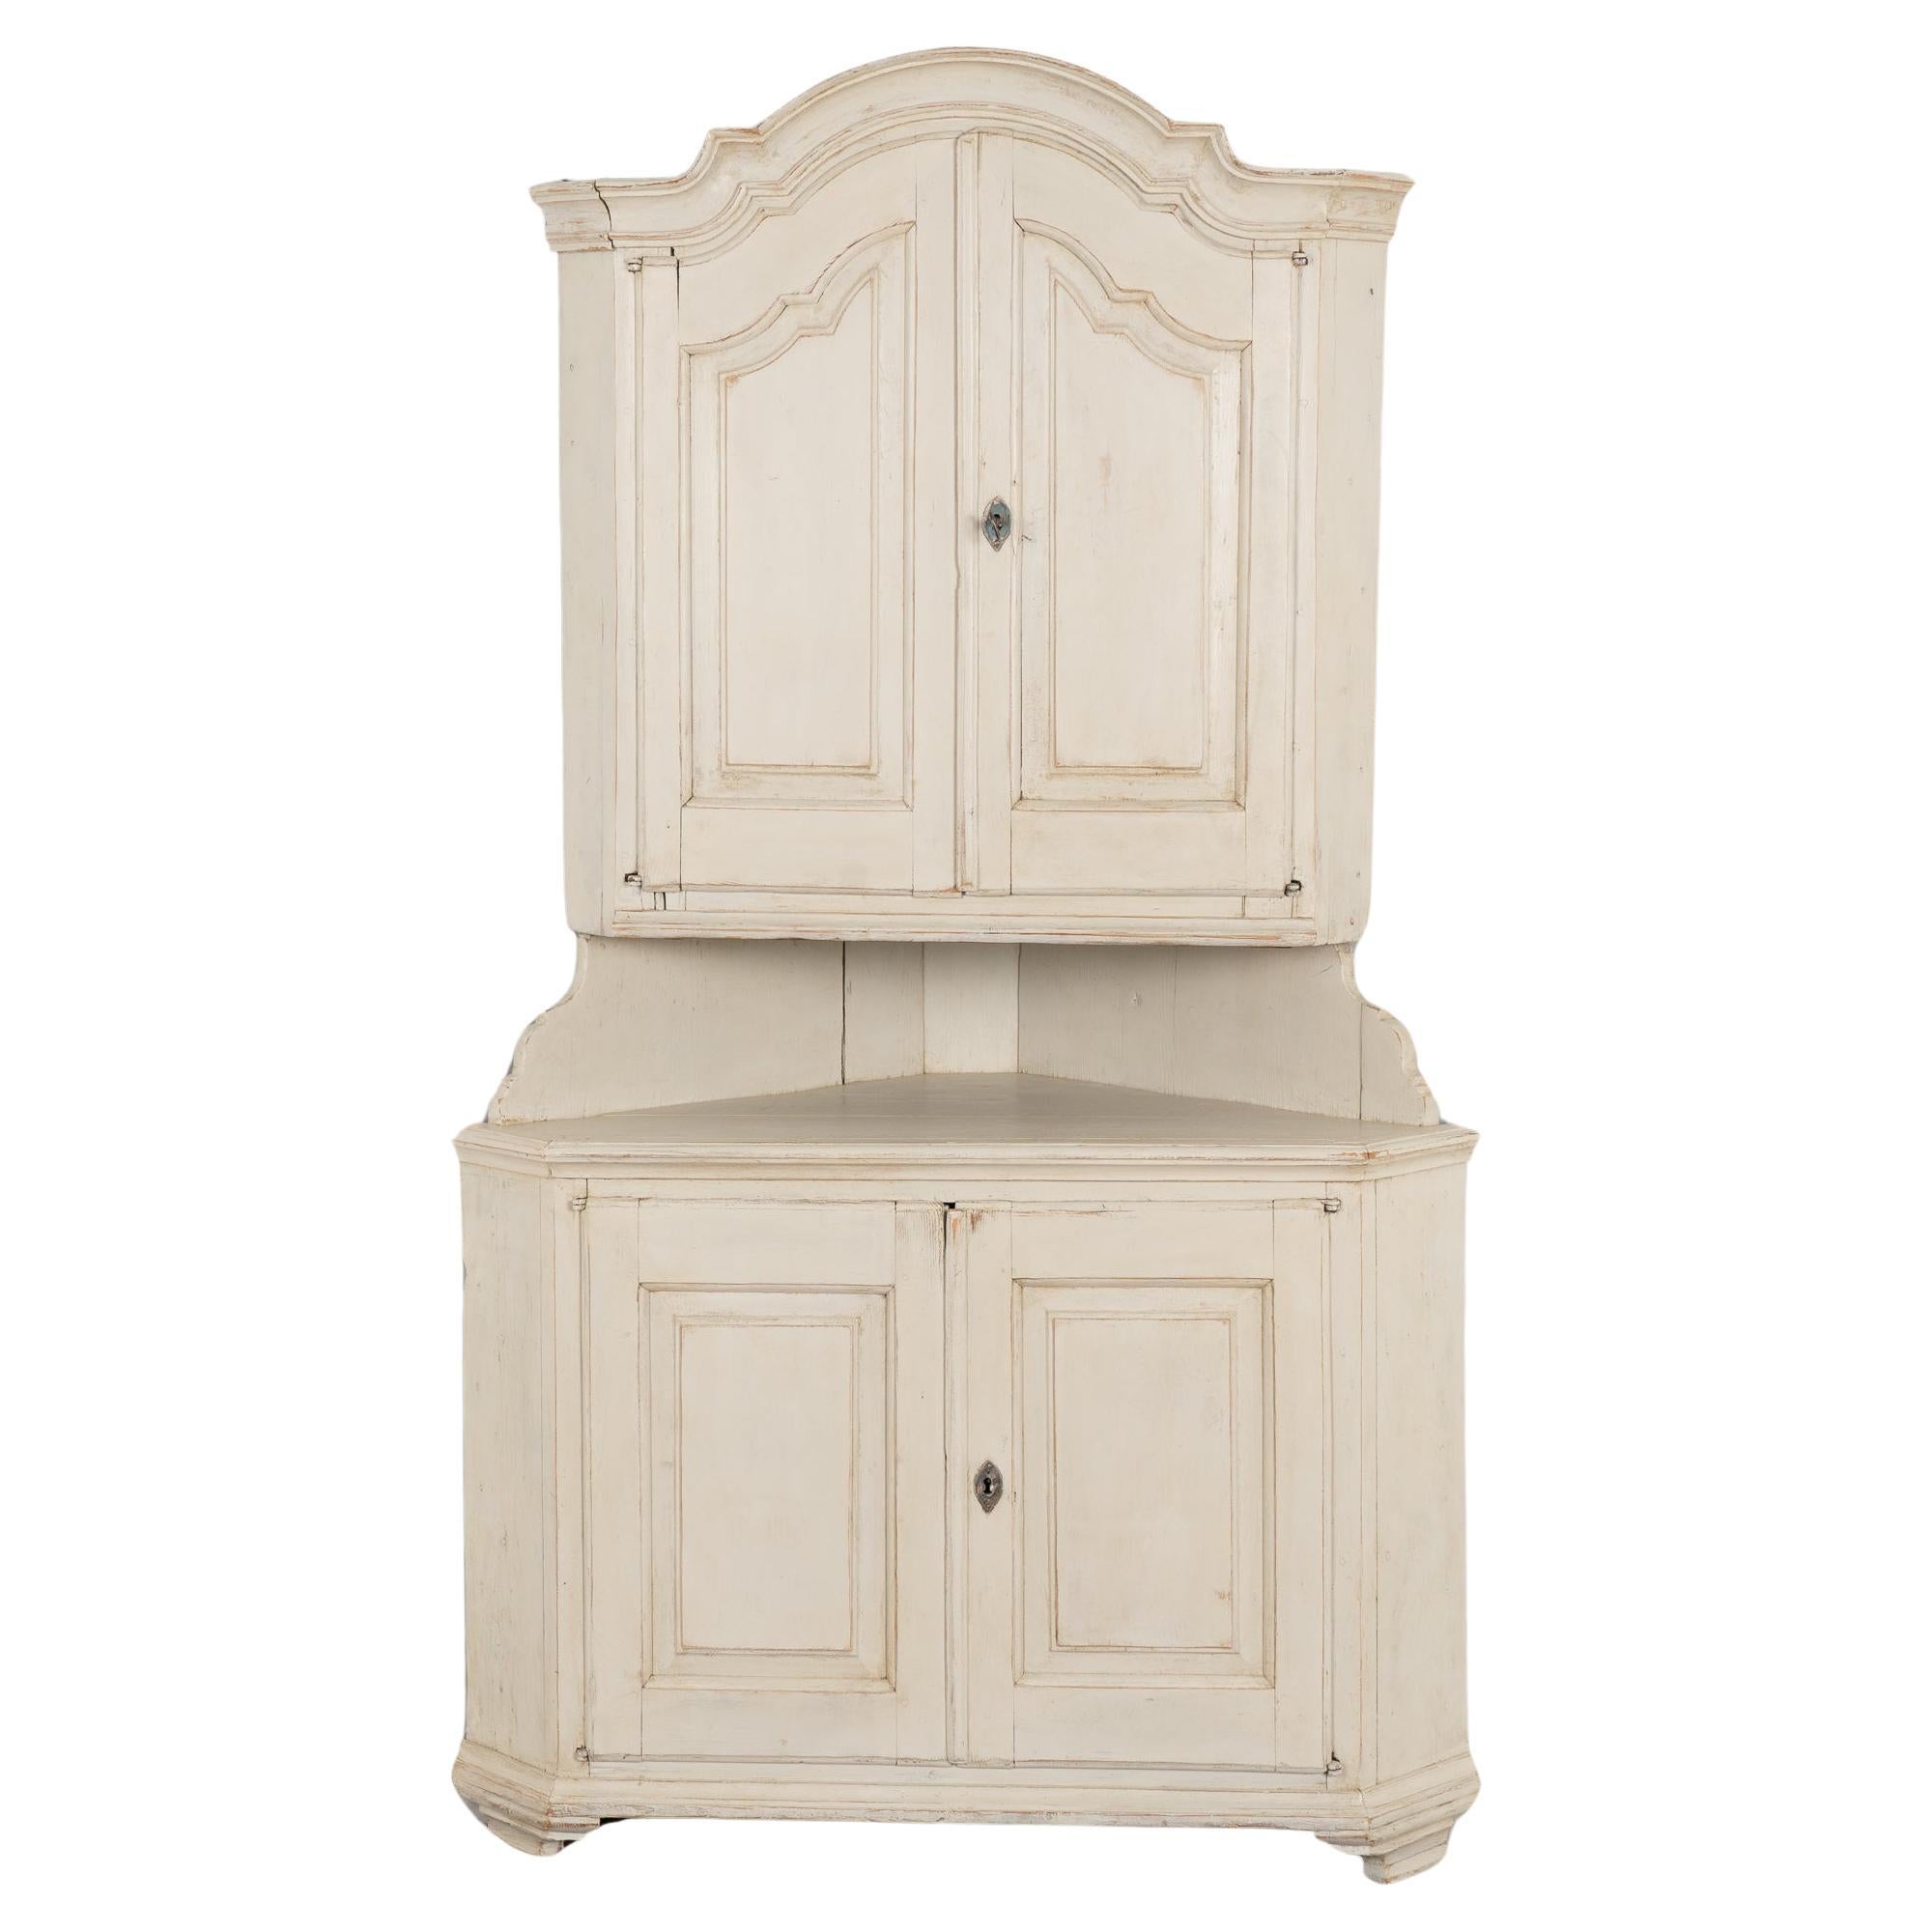 Antique White Painted Corner Cabinet Cupboard, Sweden circa 1840-60 For Sale